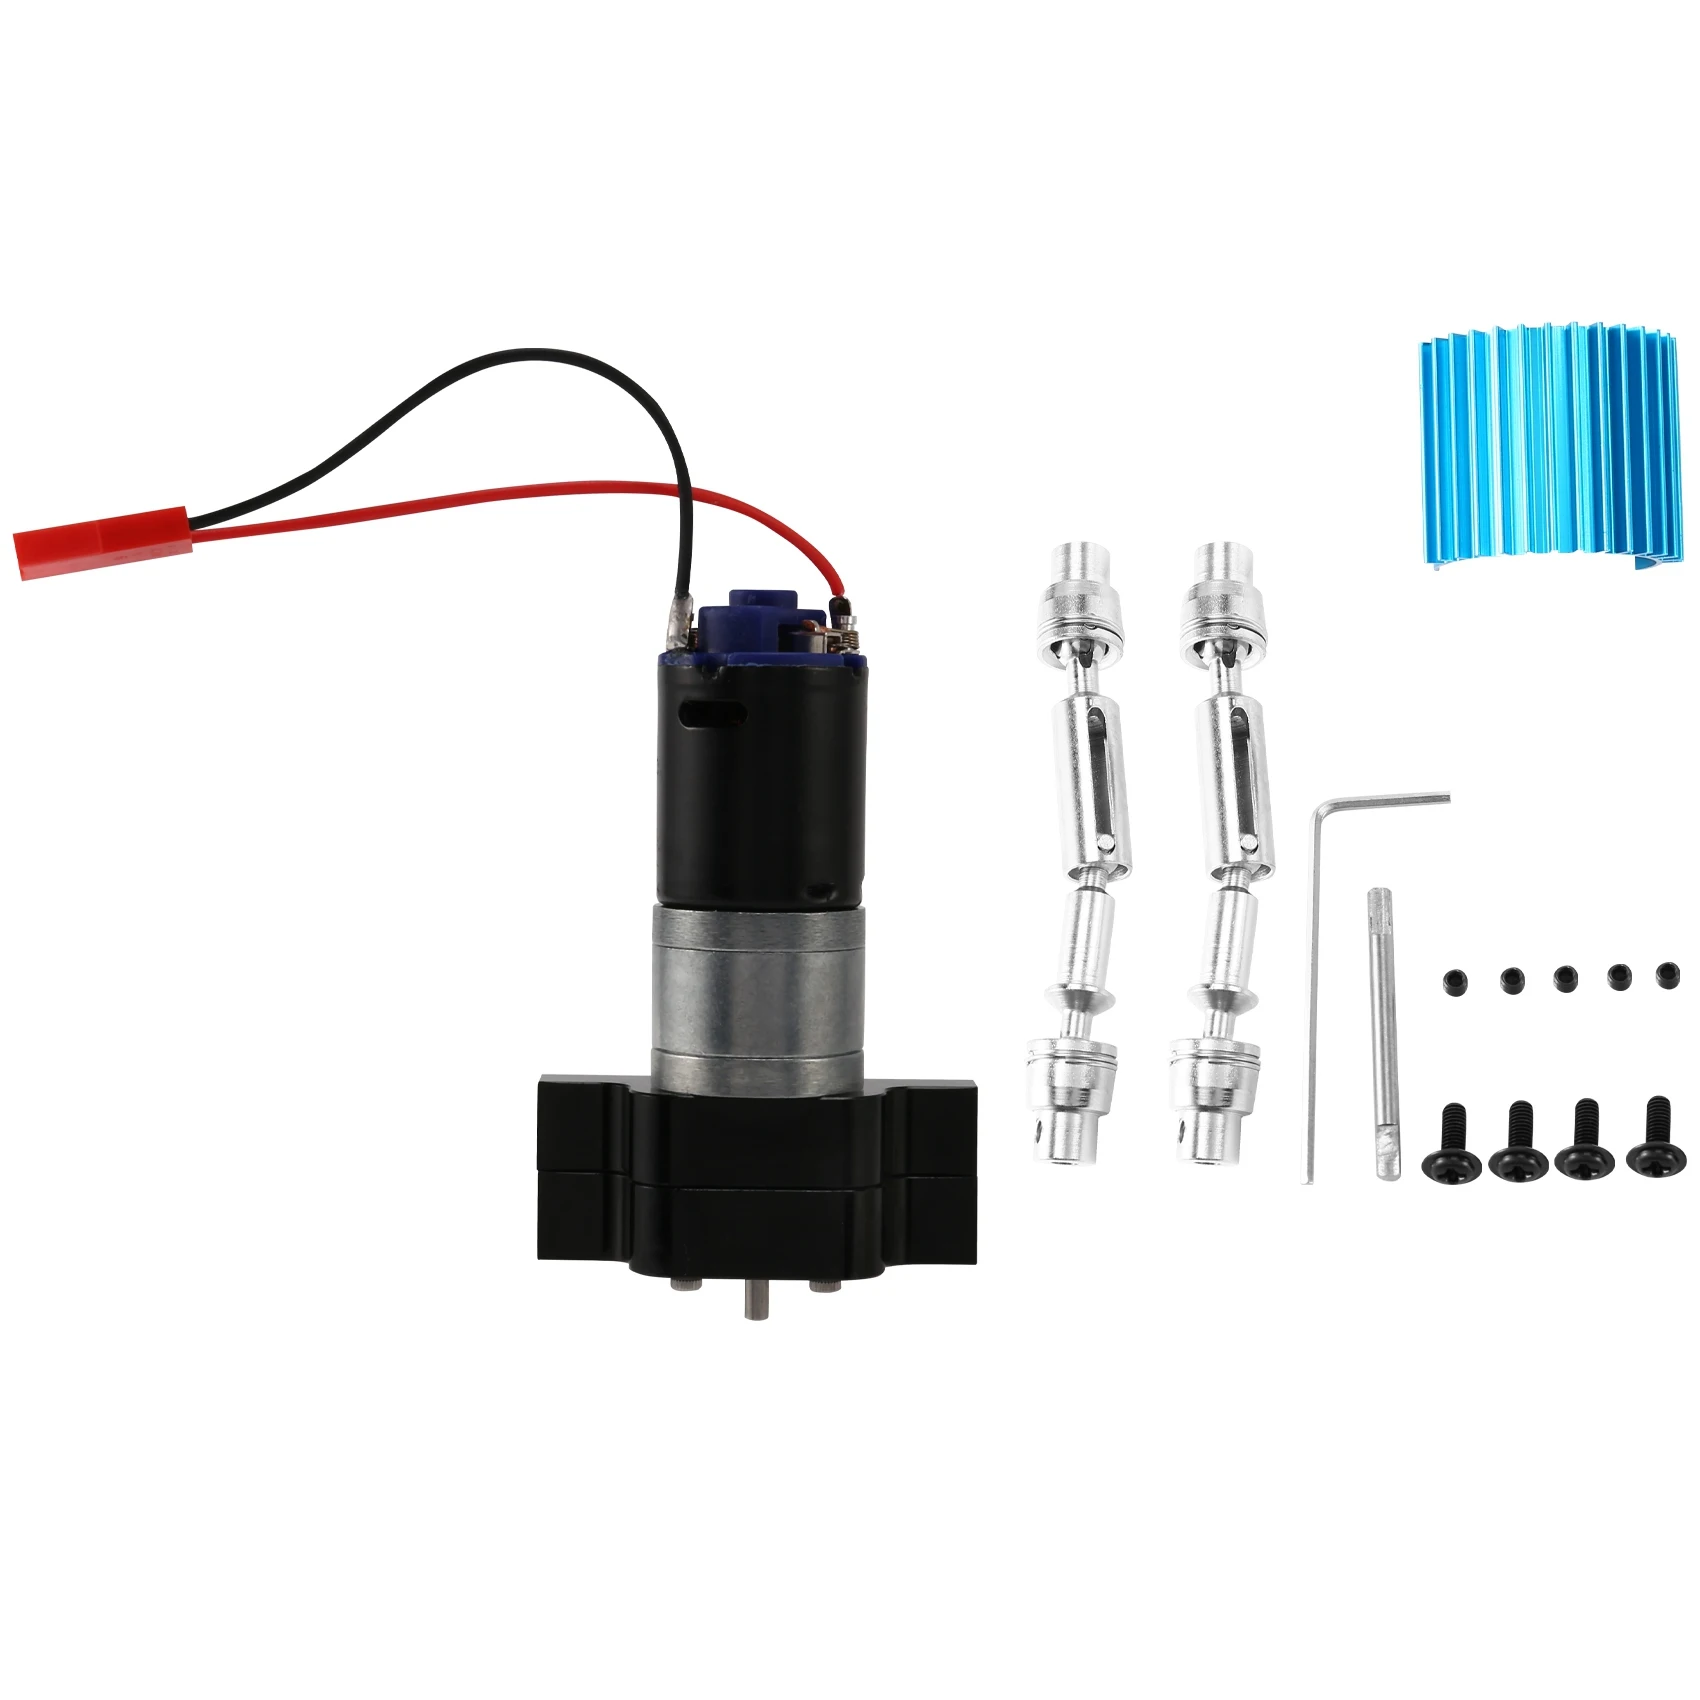 

Metal Transmission Gearbox 370 Motor with Drive Shaft Upgrade Accessories for WPL C14 C24 B24 B36 MN D90 MN99S RC Car,Black